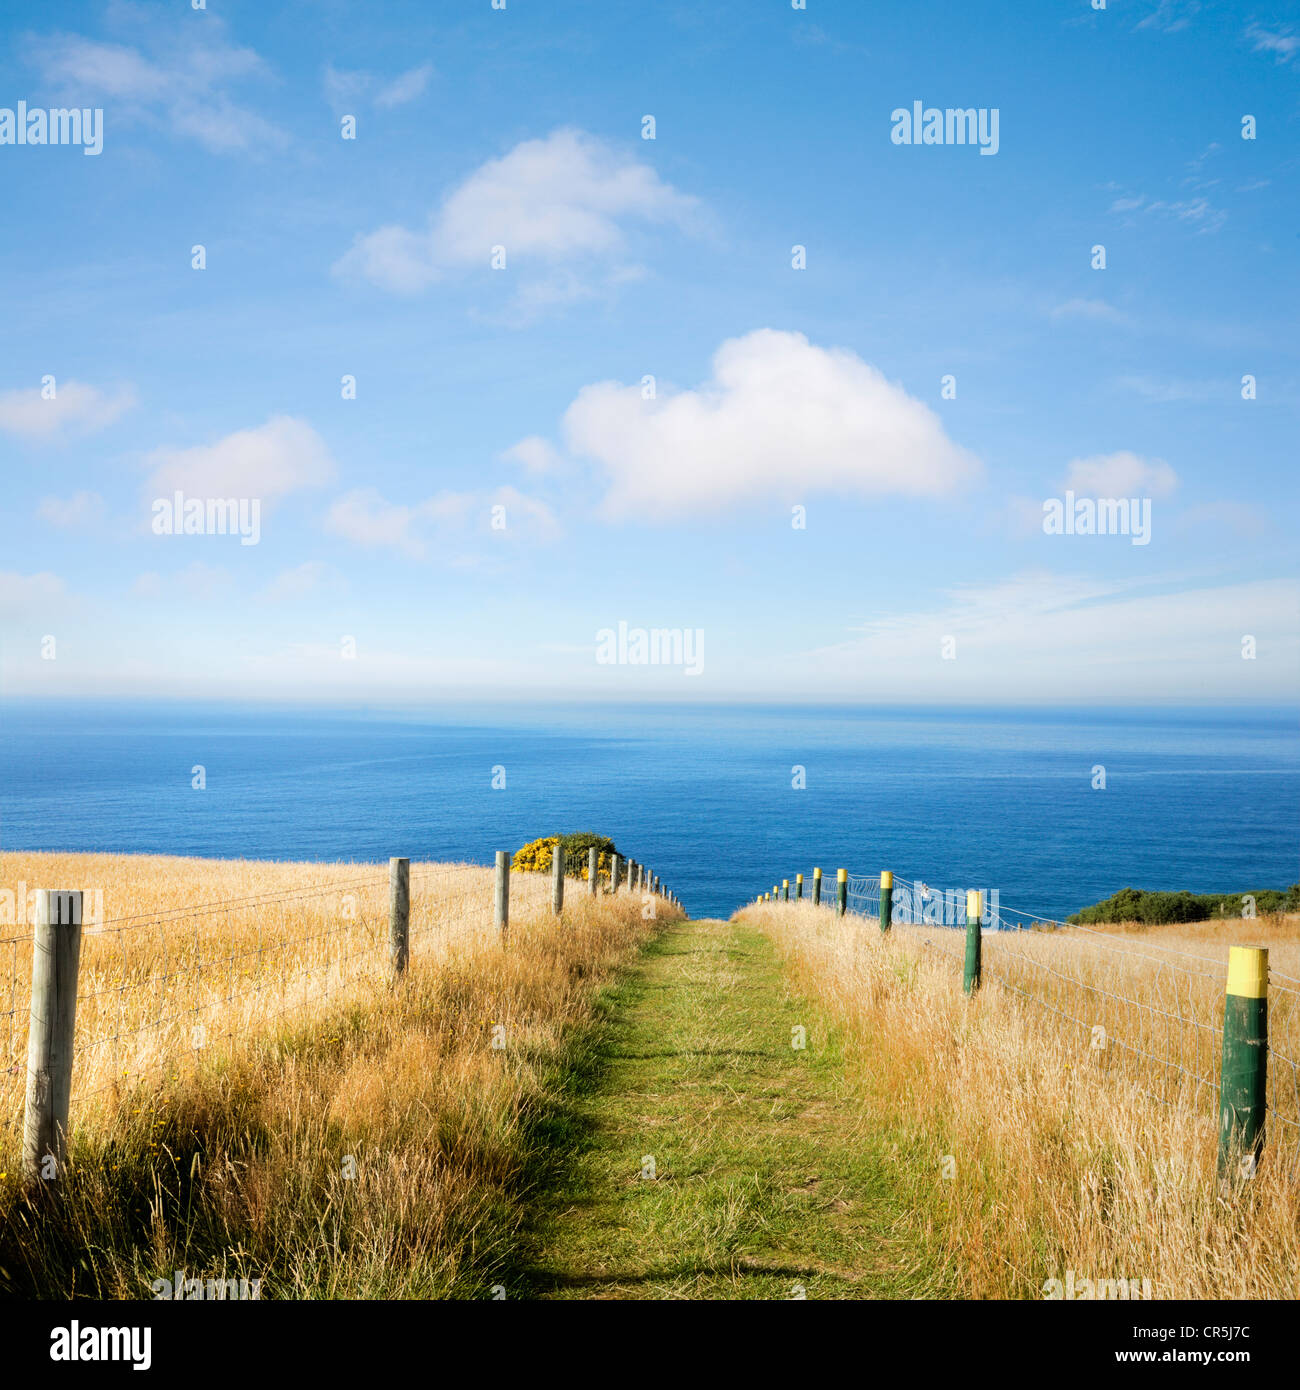 Summer, and a path through golden grasses to the sea, under a beautiful blue sky. Dunedin, New Zealand Stock Photo